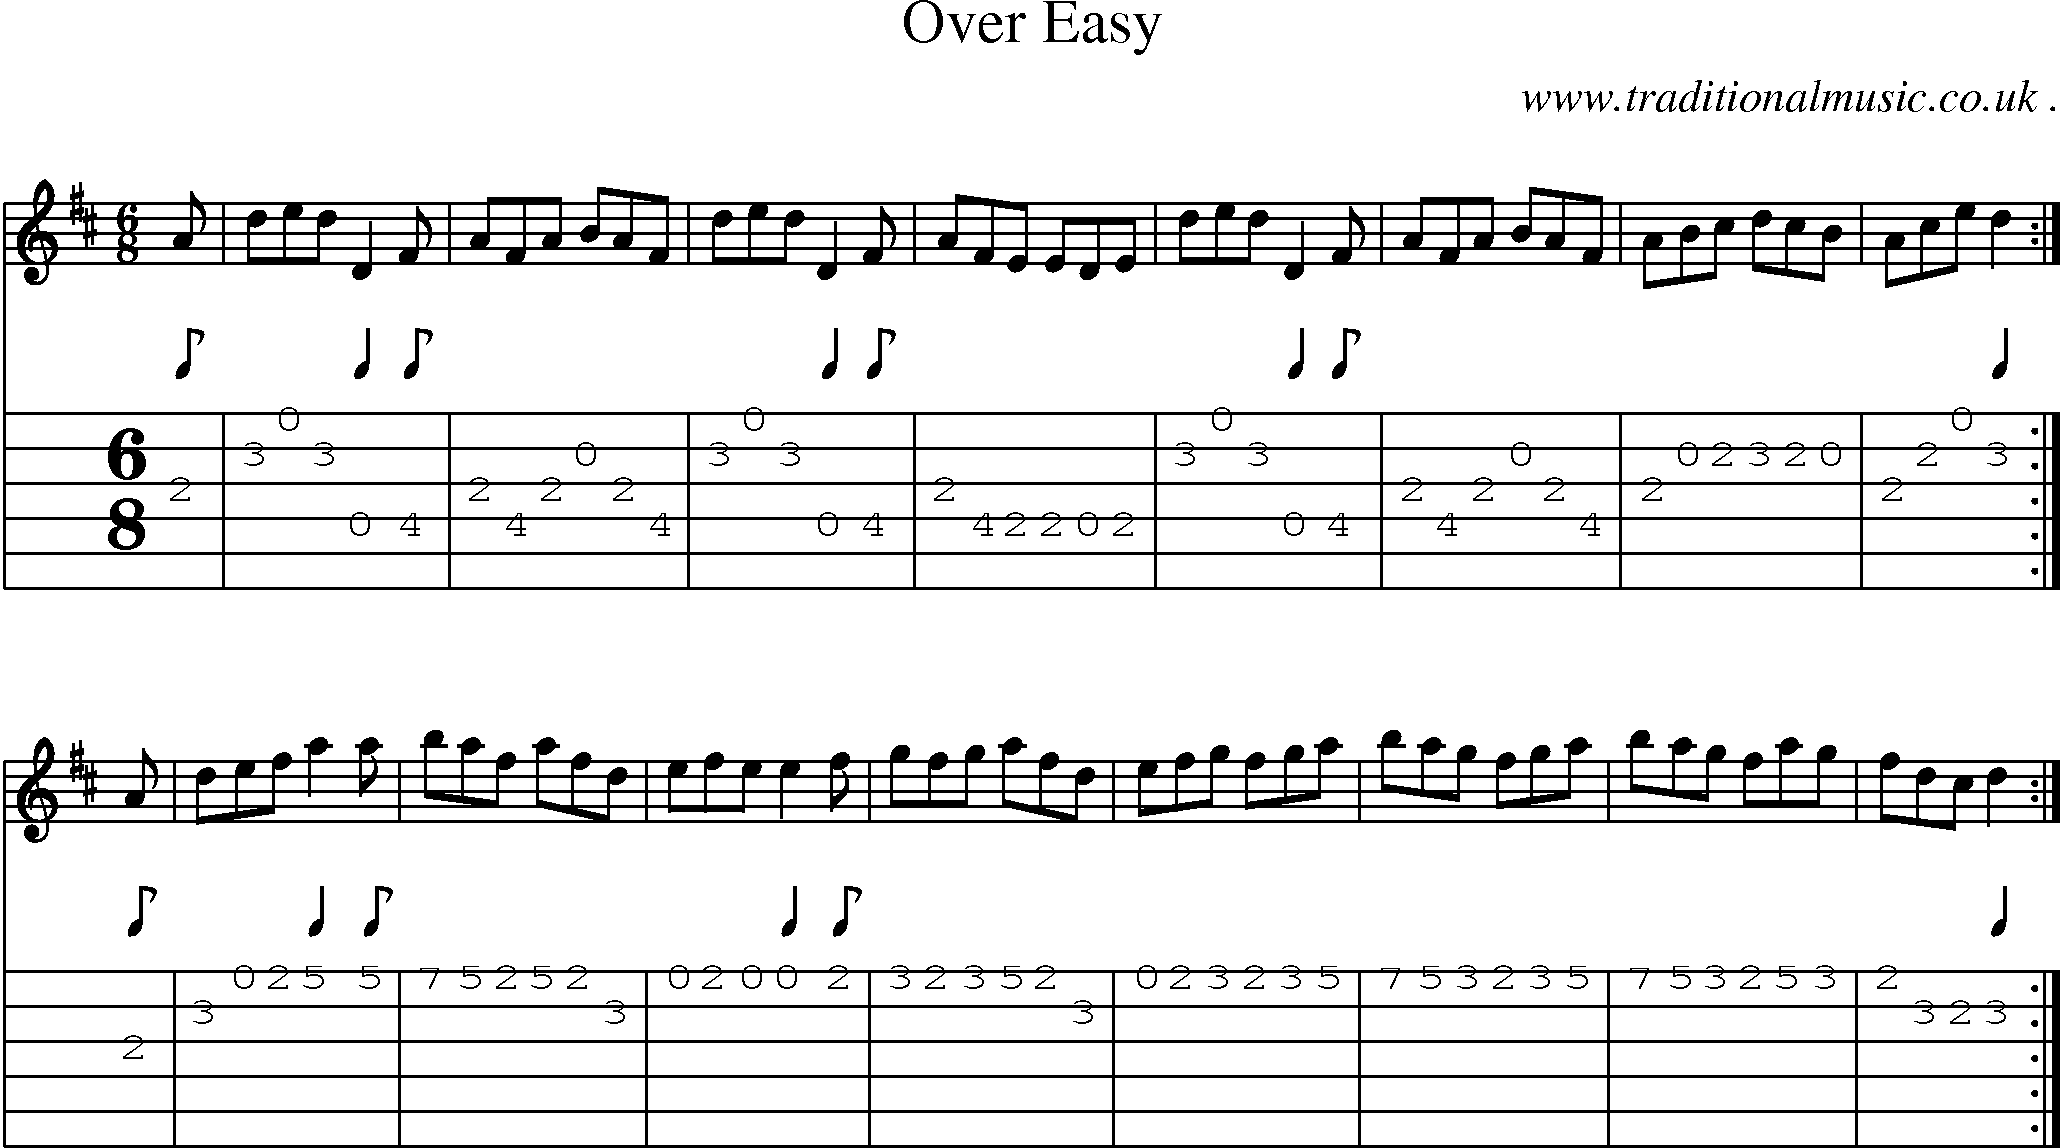 Sheet-music  score, Chords and Guitar Tabs for Over Easy